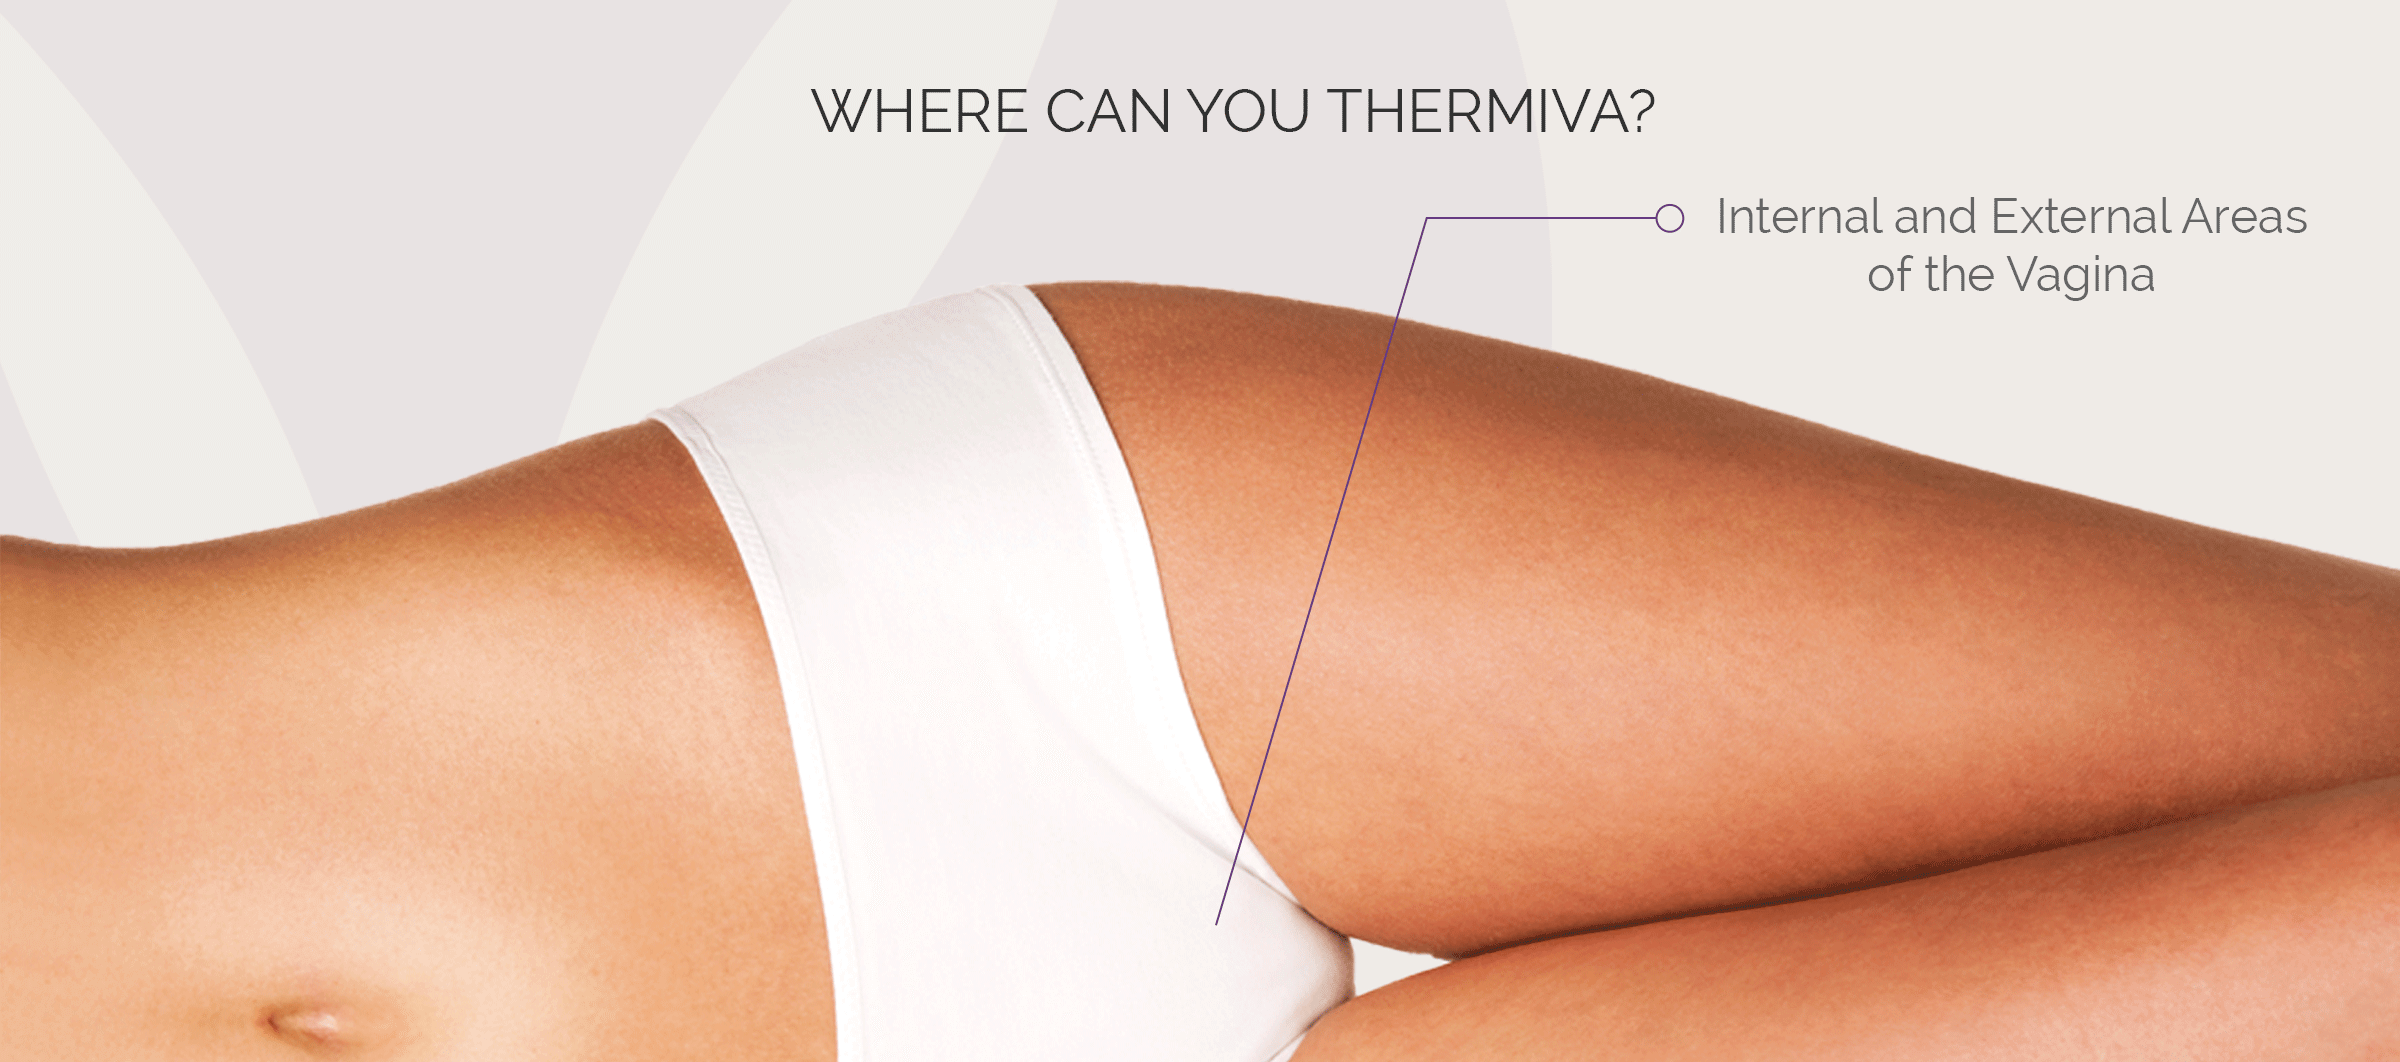 FAQ about ThermiVa and Vaginal Rejuvenation